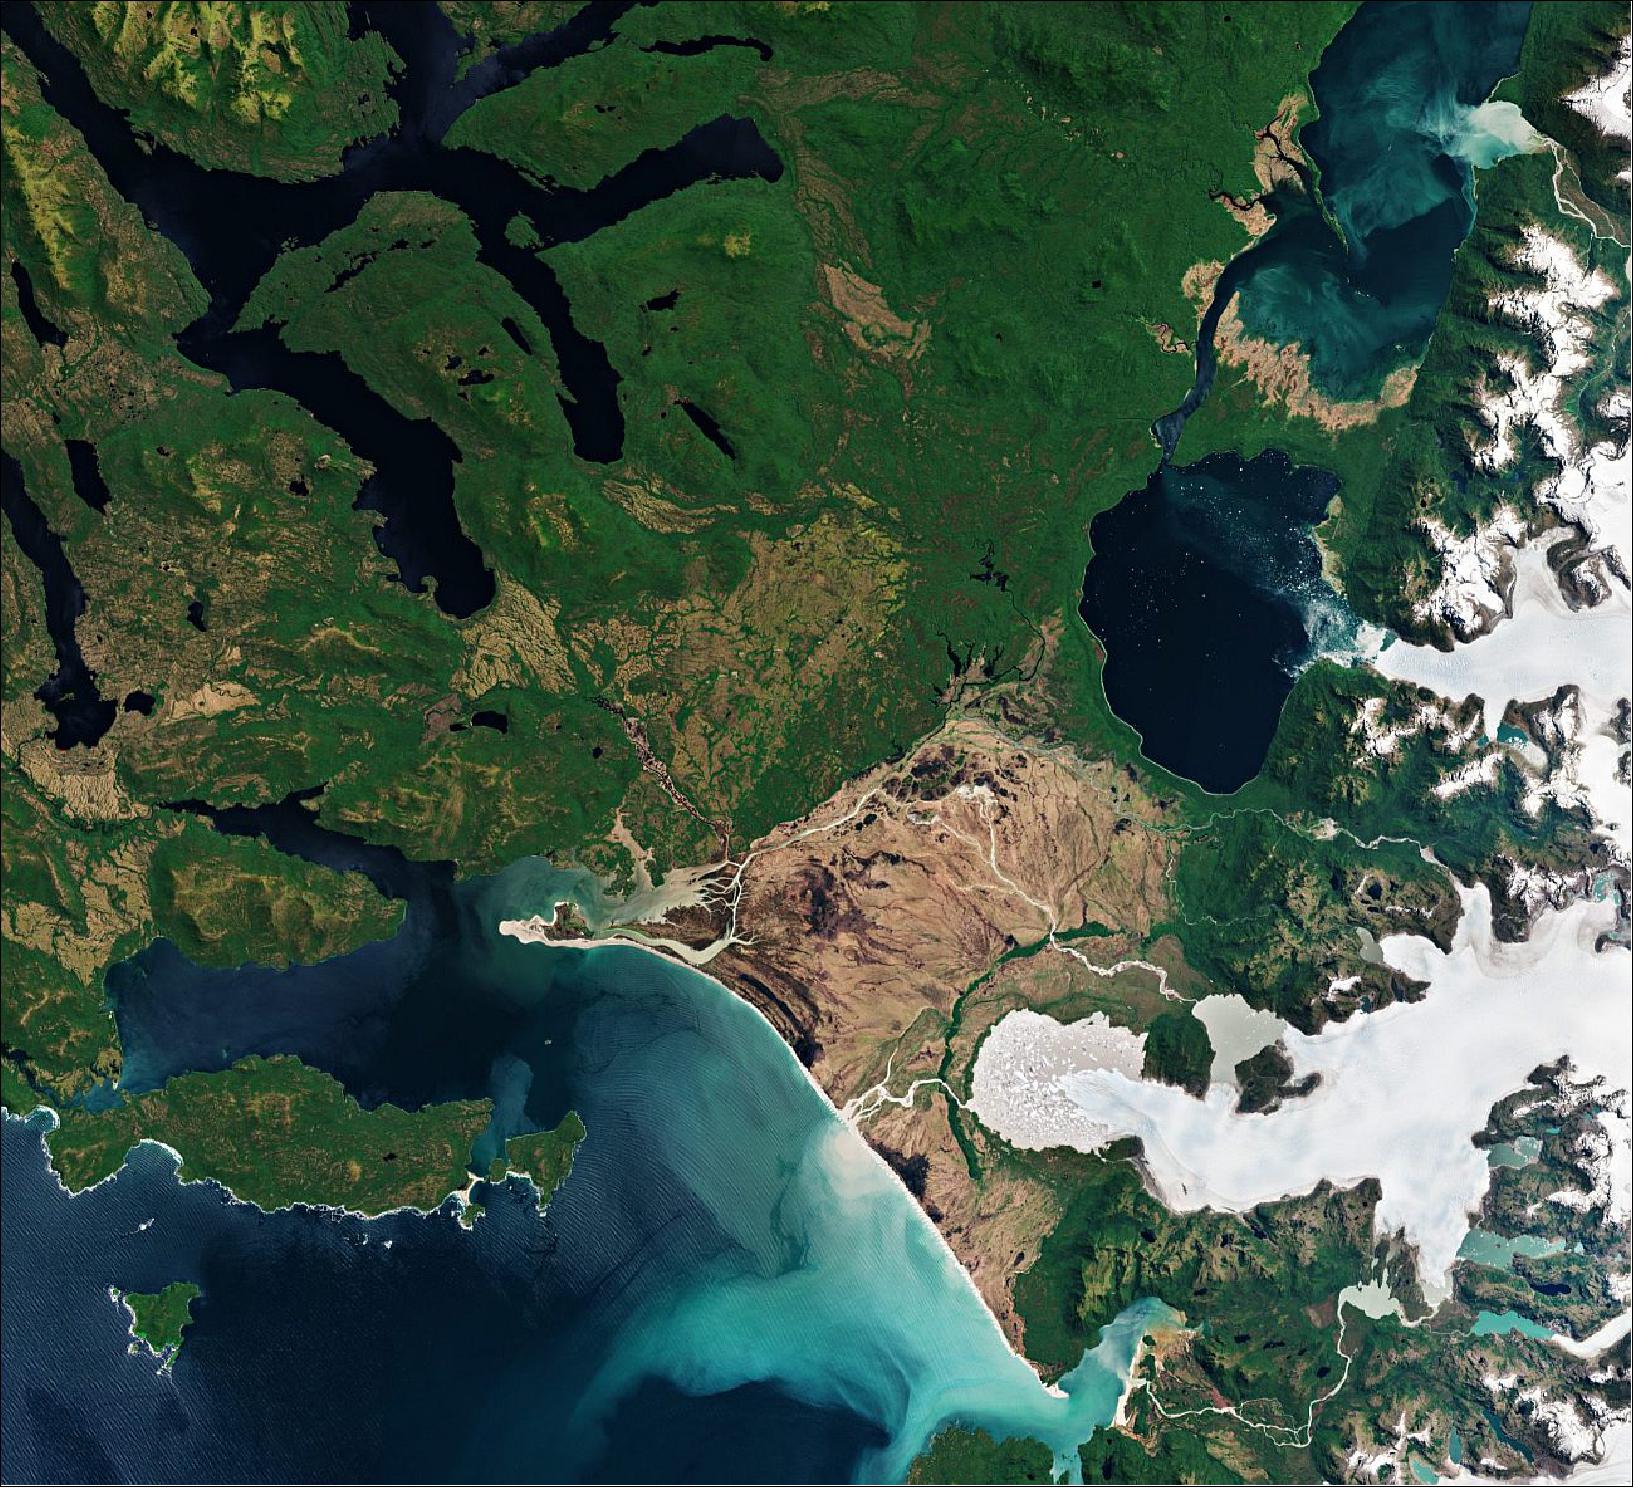 Figure 11: The image depicts the west part of the Northern Patagonian Ice Field which has 28 exit glaciers, with the largest two, San Rafael and San Quintín, visible here. San Rafael Glacier, which can be seen in the upper-right of the image, is one of the most actively calving glaciers in the world and the fastest-moving glacier in Patagonia – ‘flowing’ at a speed of around 7.6 km per year. This image is also featured on the Earth from Space video program (image credit: ESA, the image contains modified Copernicus Sentinel data (2018), processed by ESA, CC BY-SA 3.0 IGO)